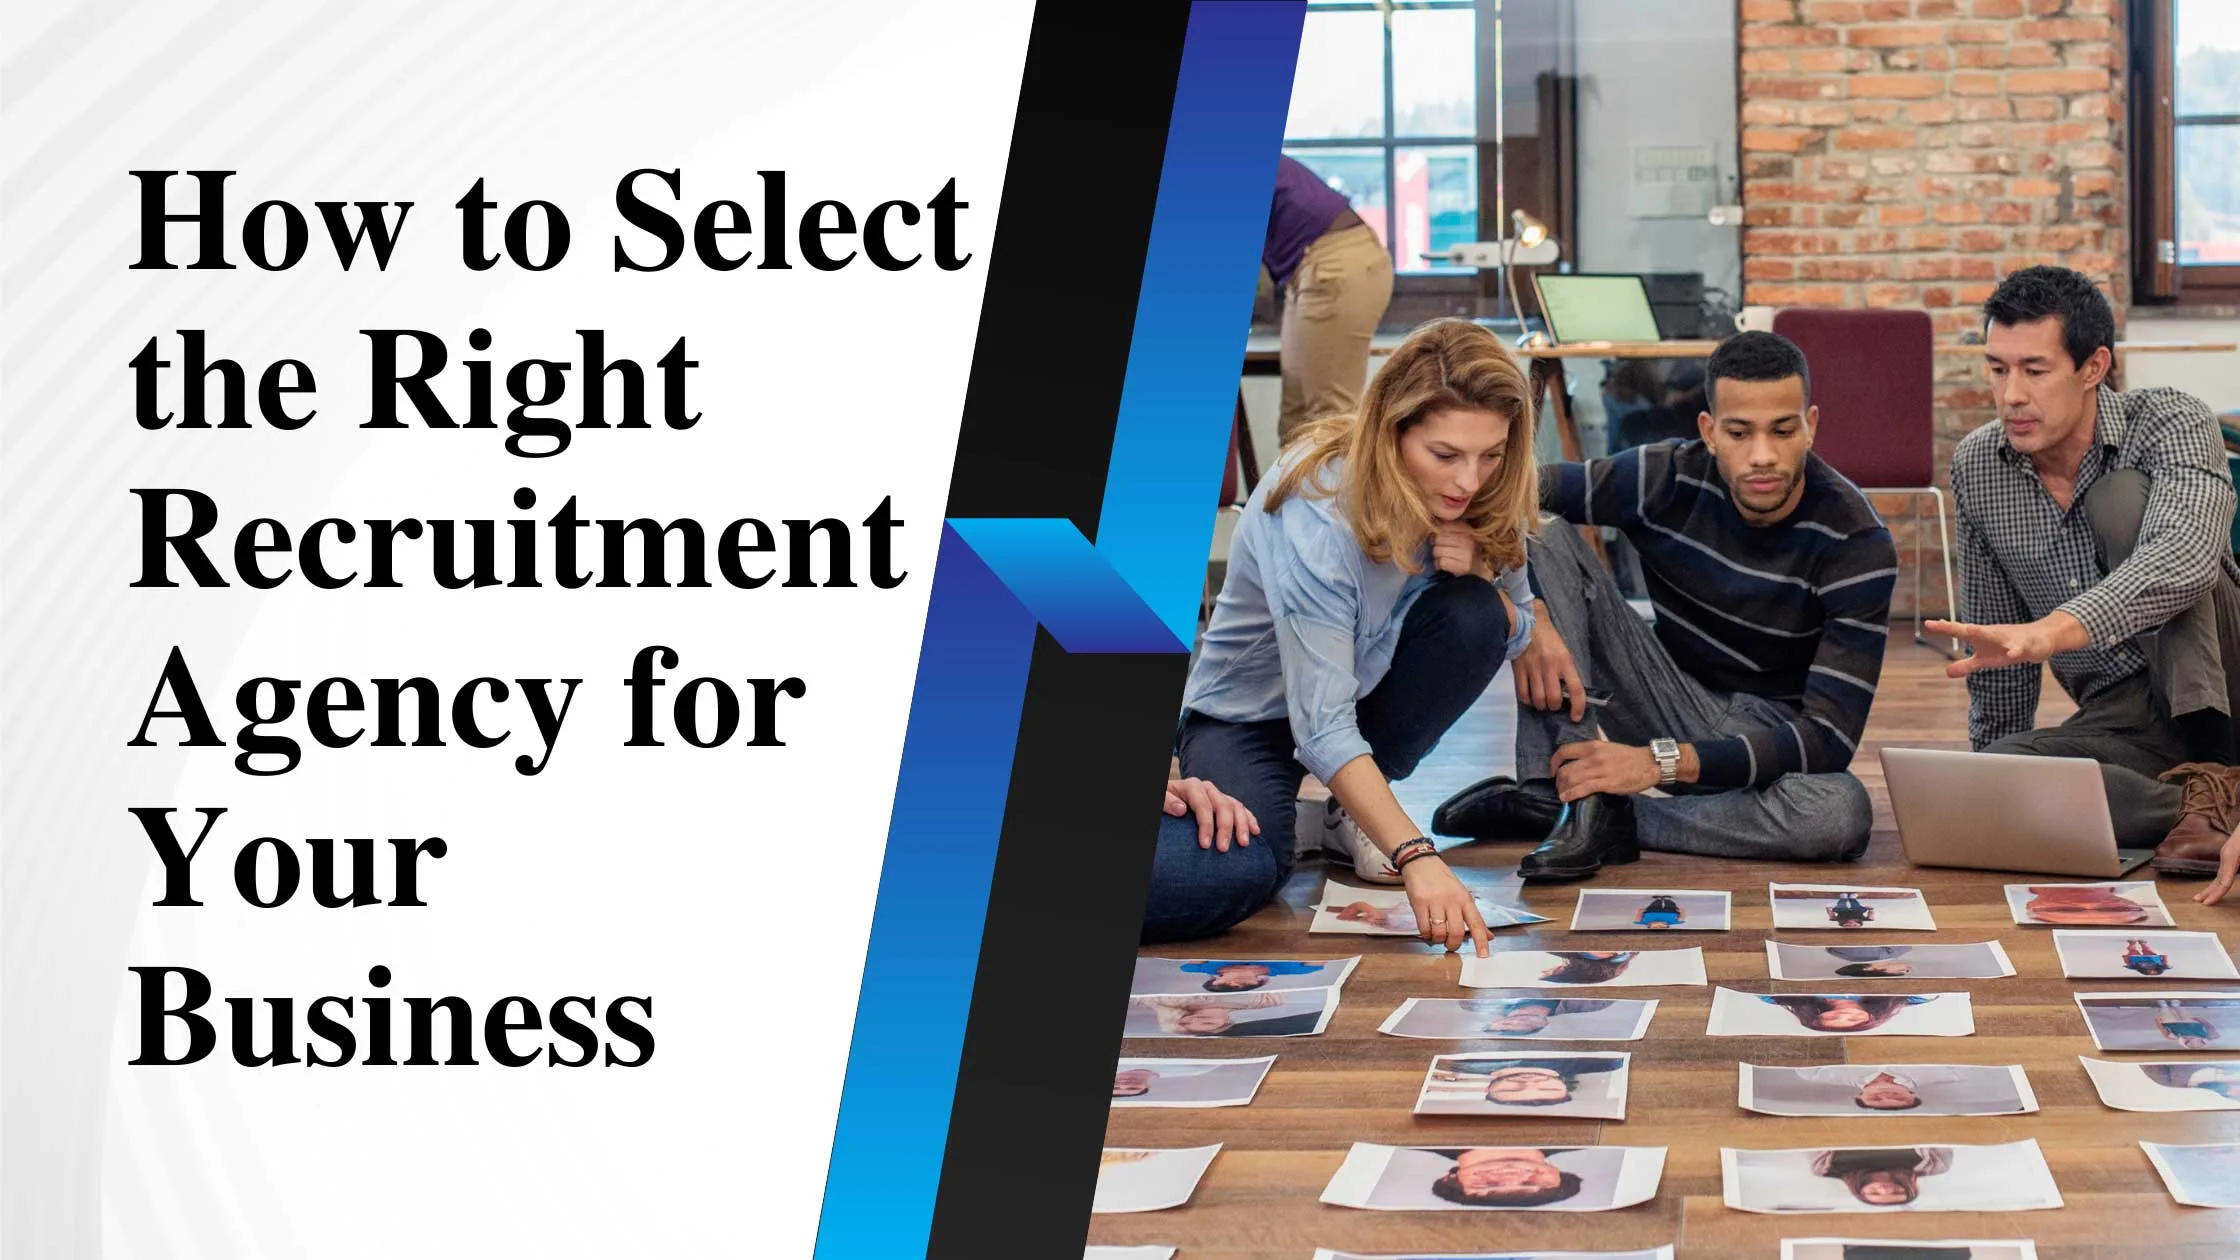 How to Select the Right Recruitment Agency for Your Business